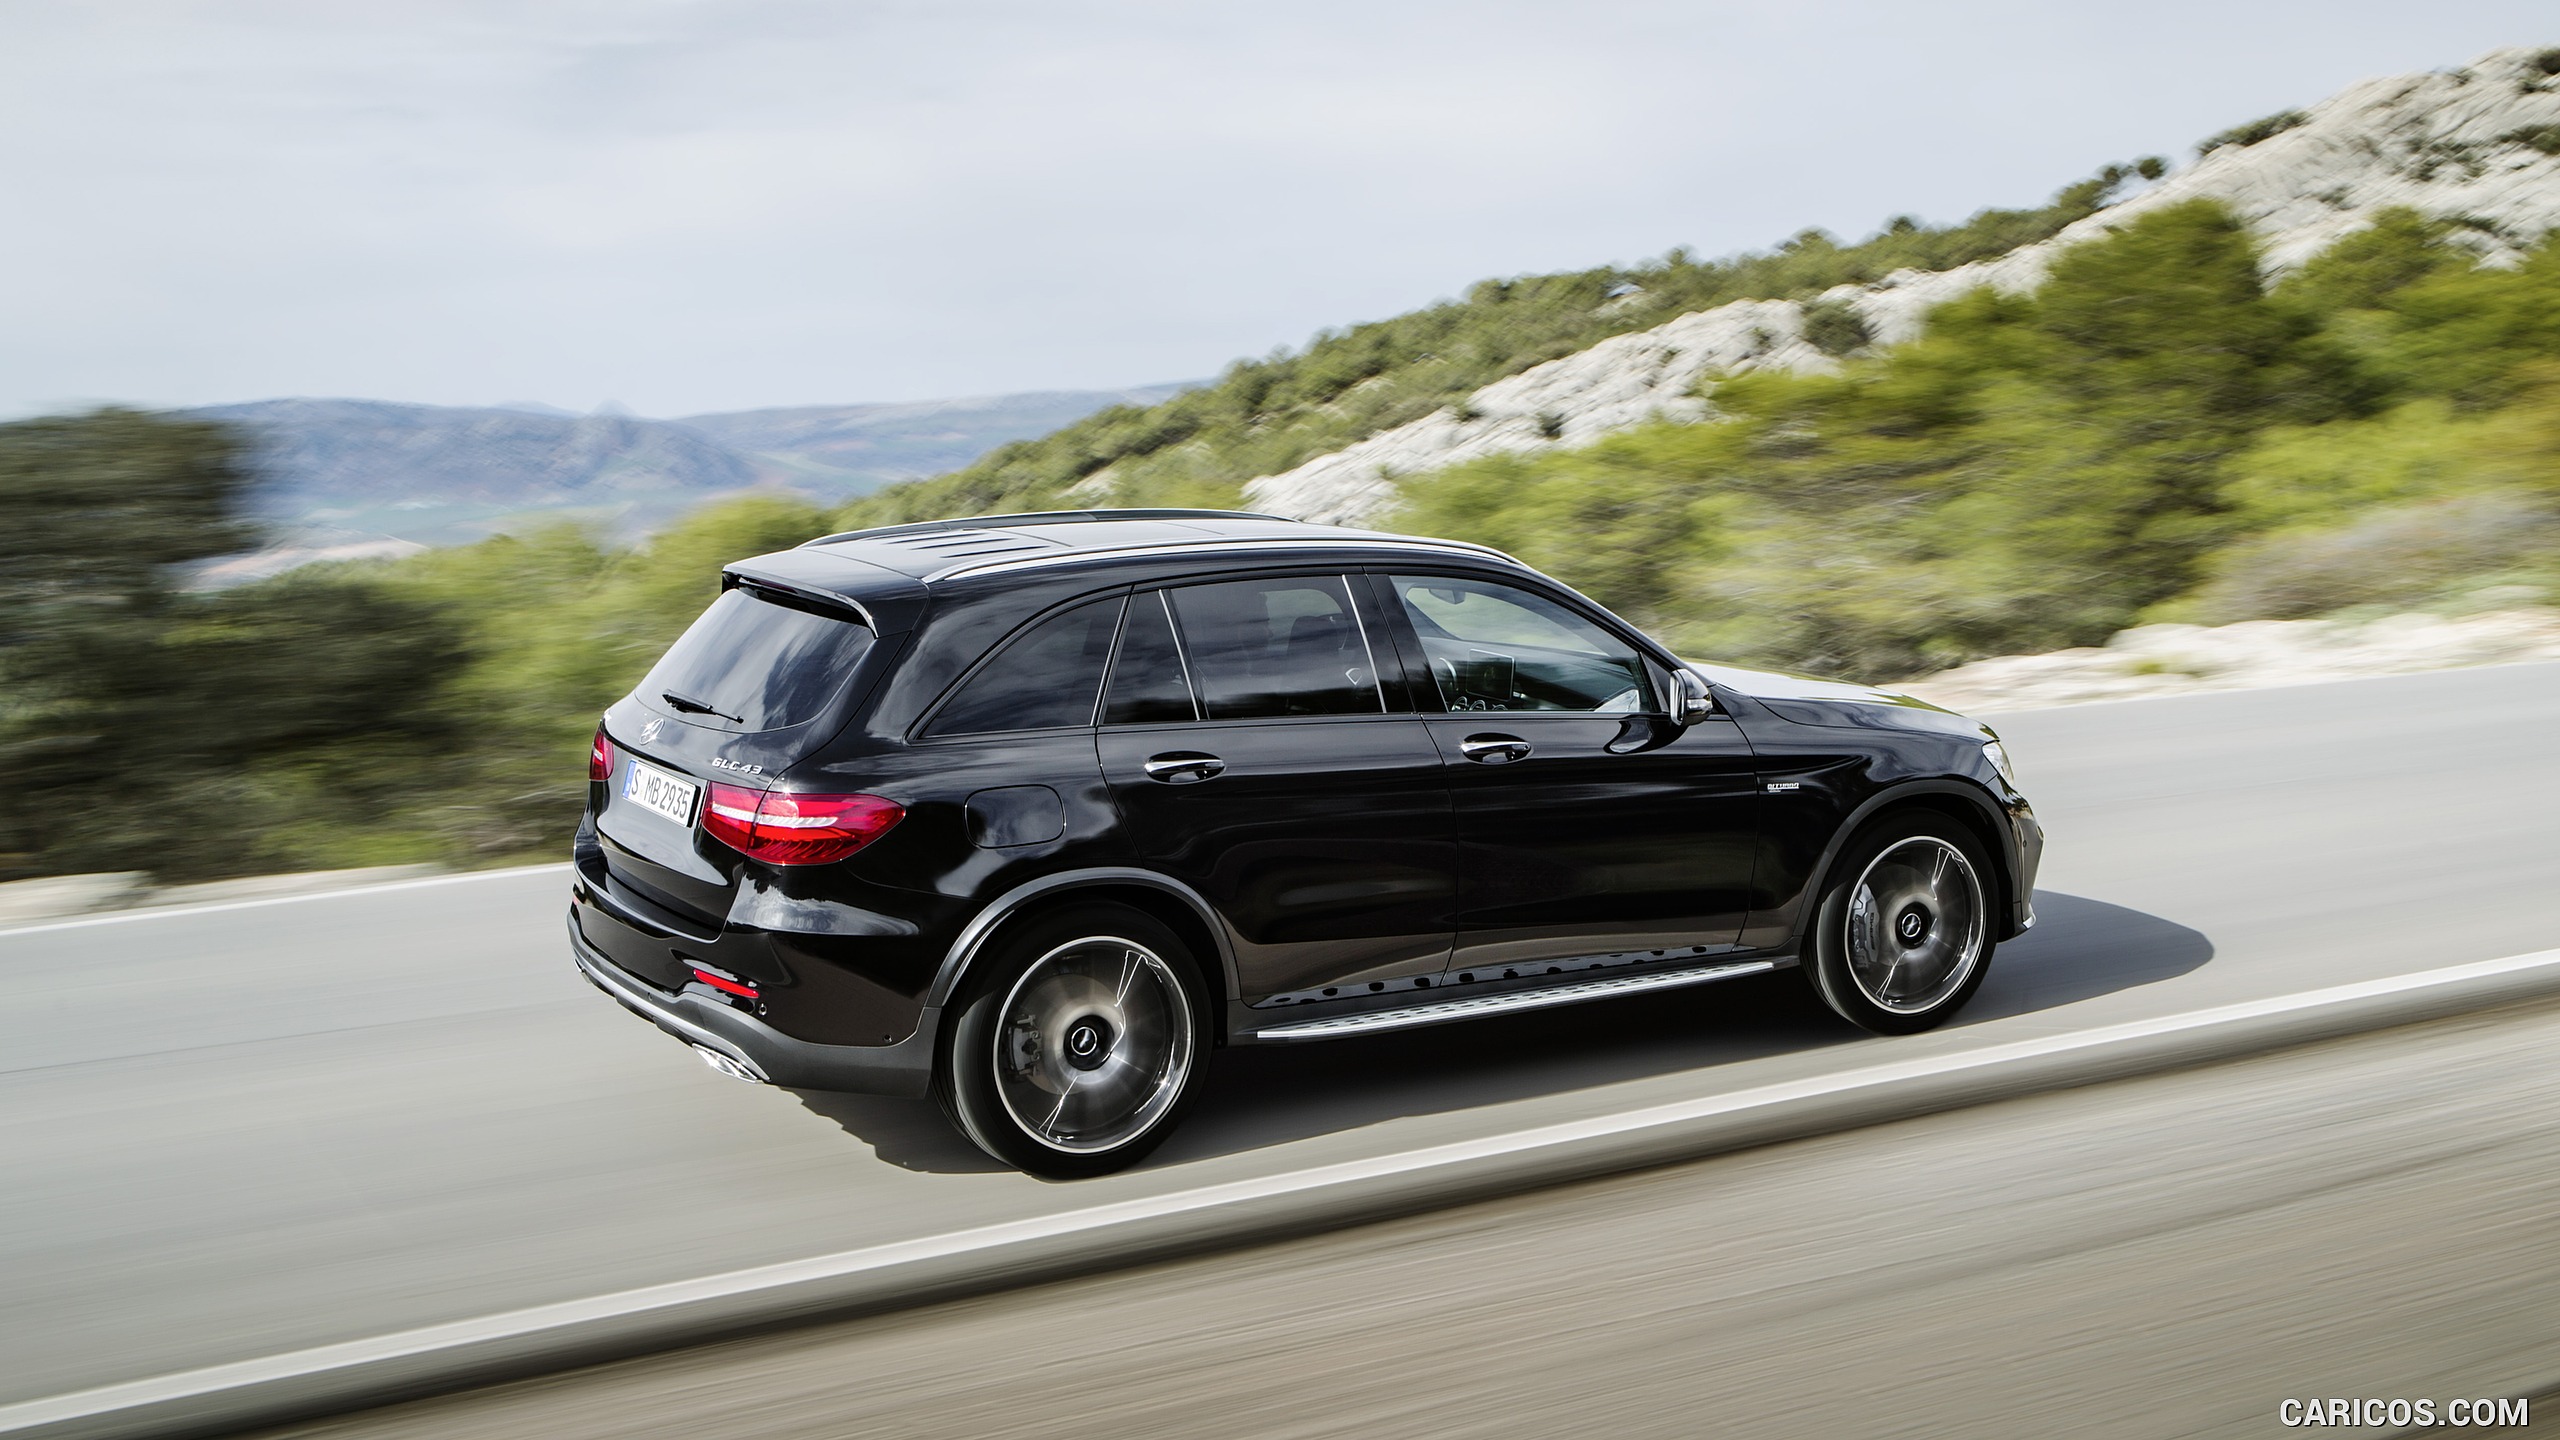 2017 Mercedes-AMG GLC 43 4MATIC (Chassis: X253, Color: Obsidian Black) - Side, #14 of 108